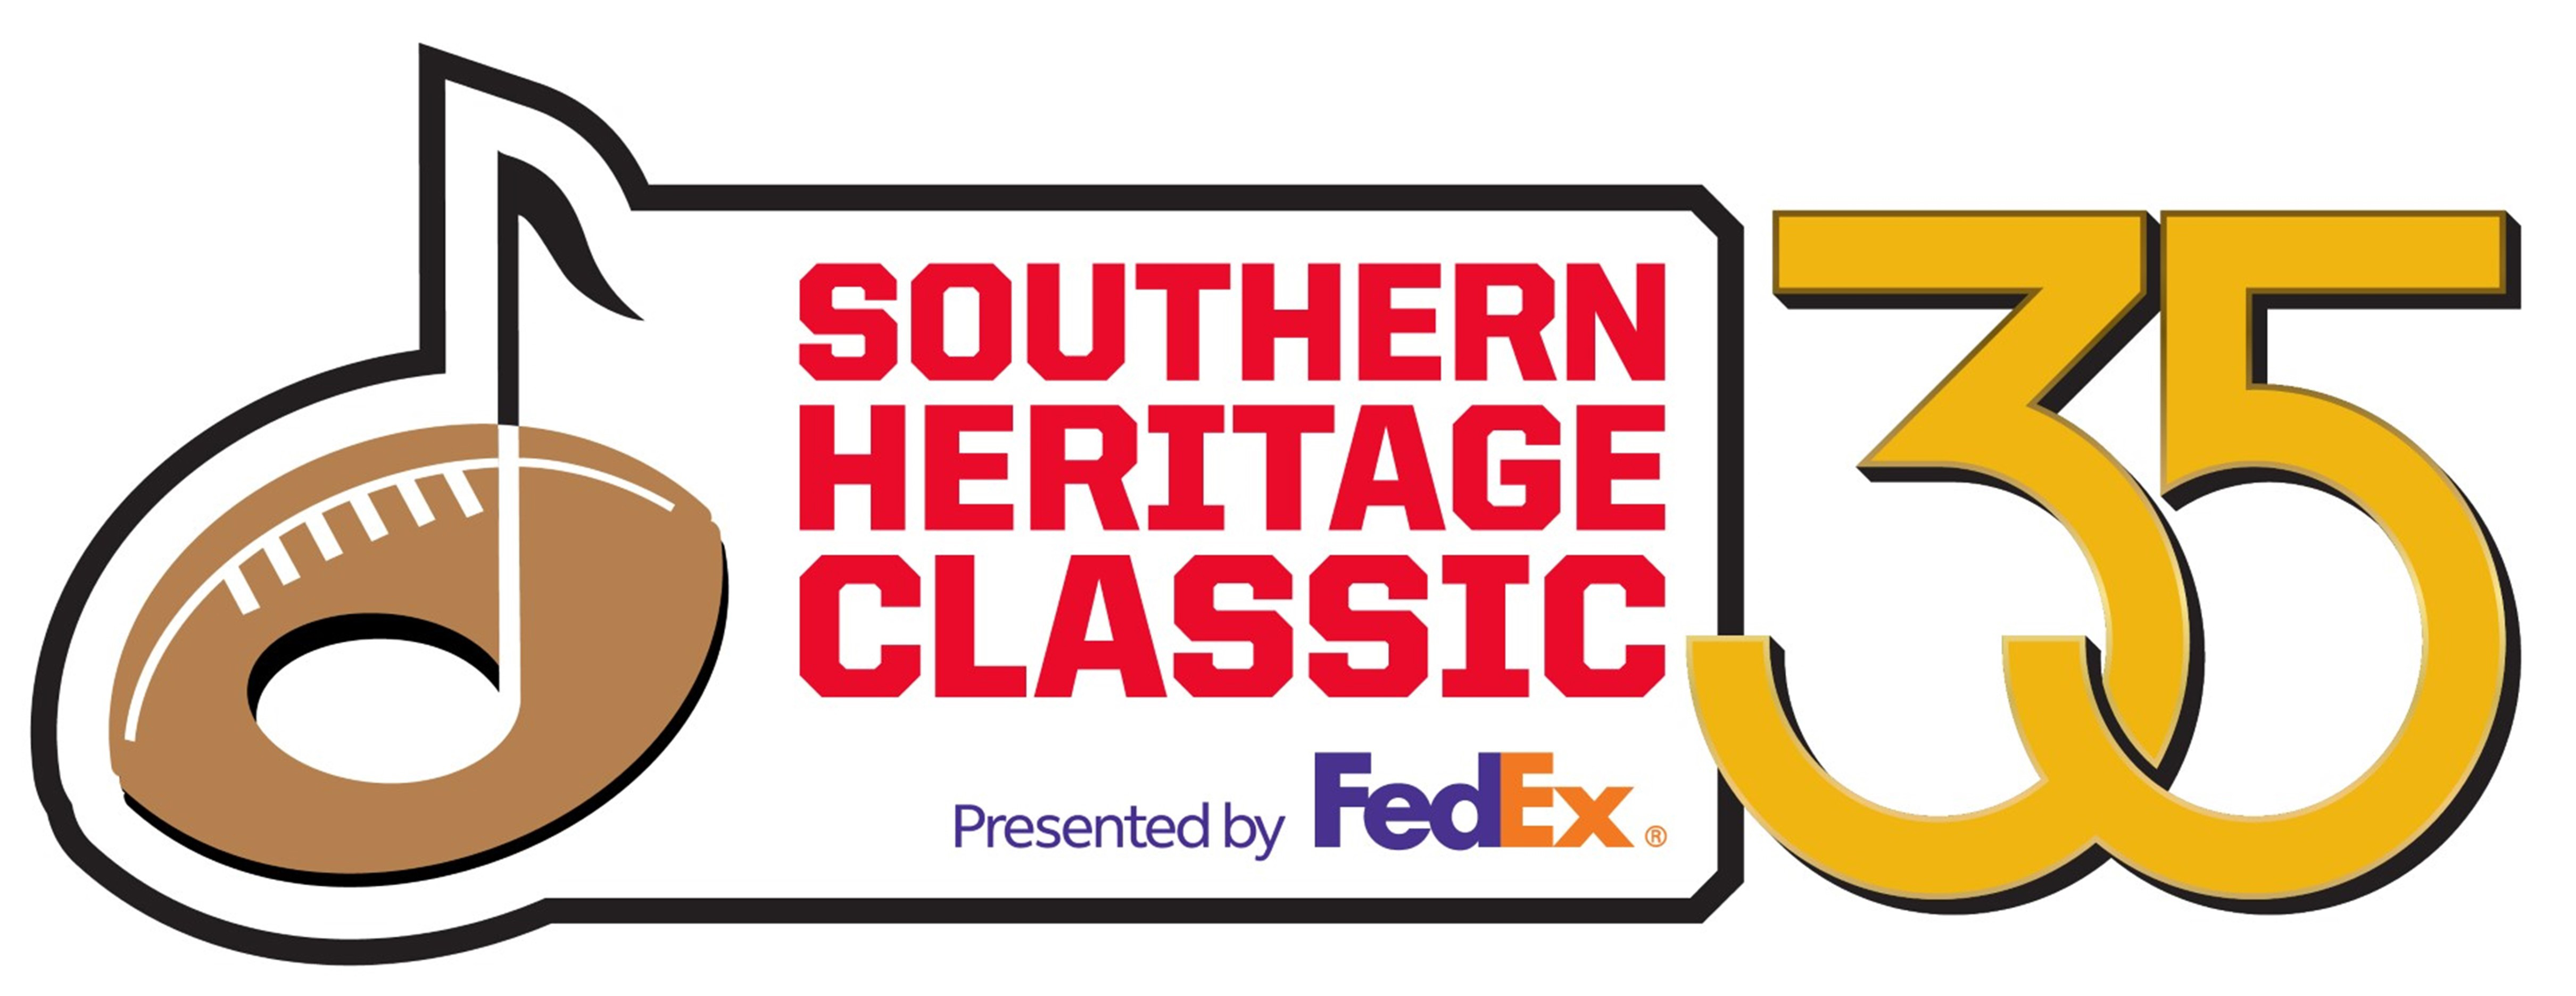 Southern Heritage Classic 35 presented by FedEx